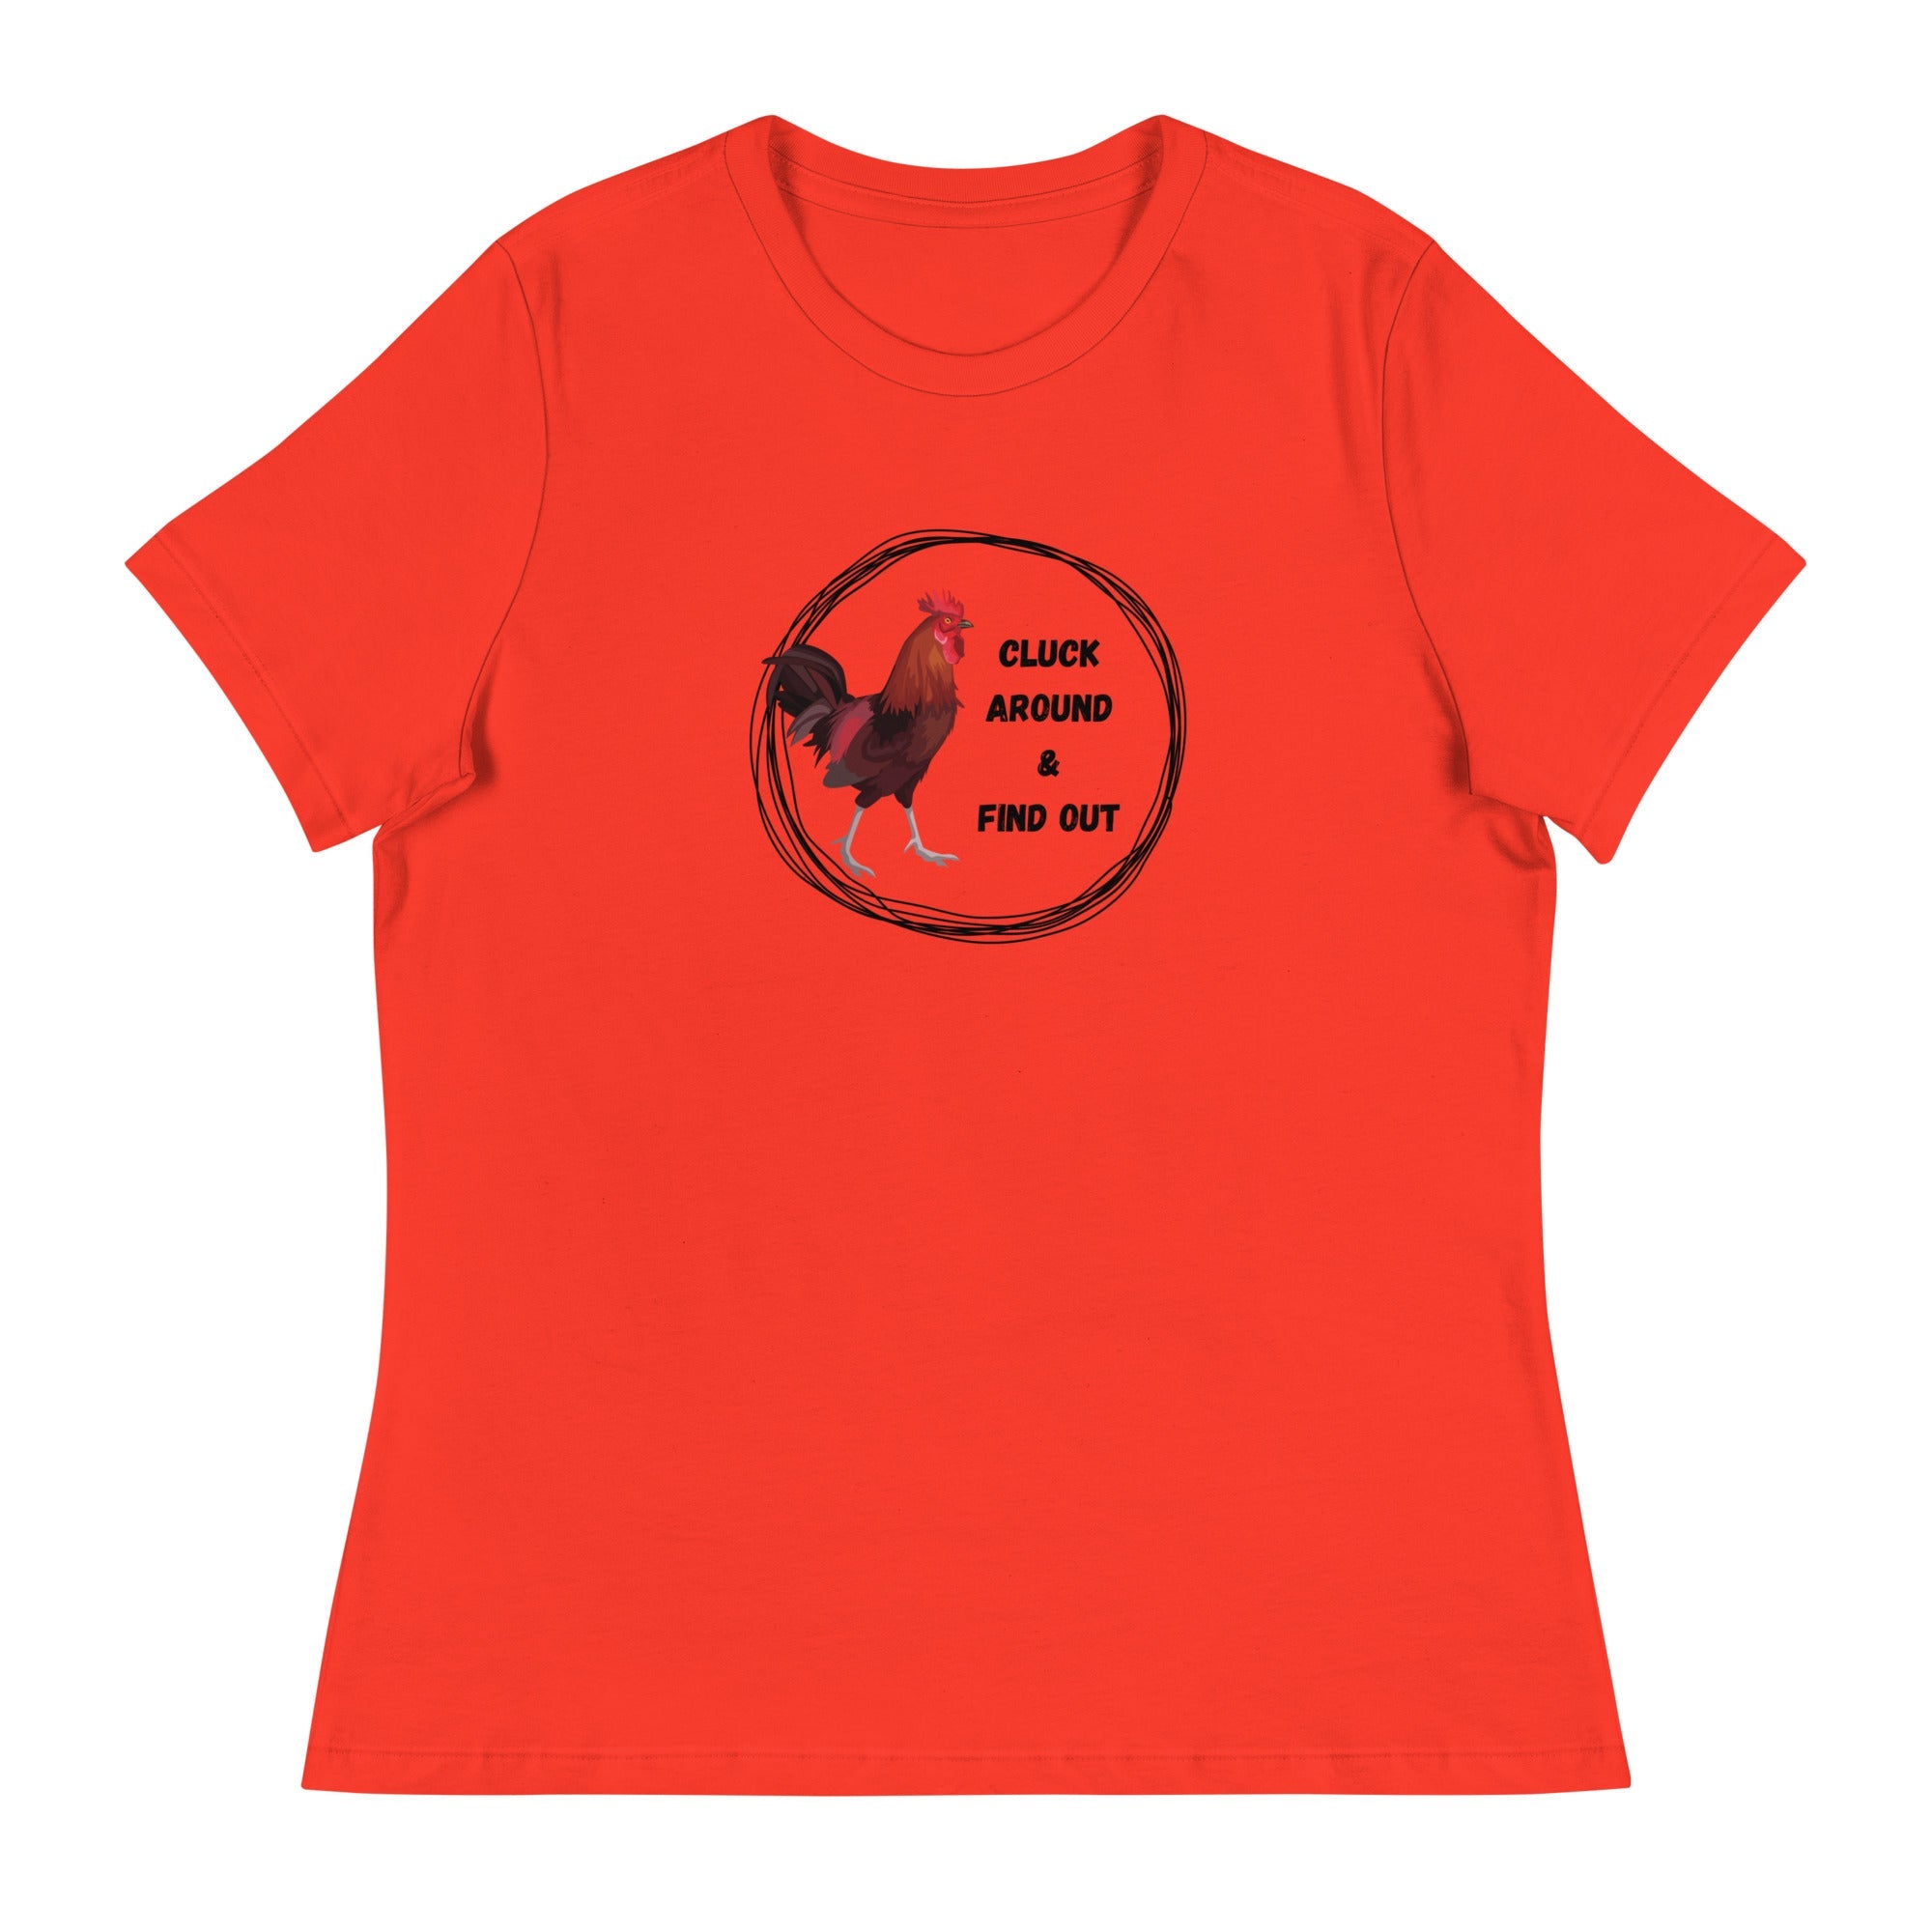 Cluck Around & Find Out Women's Relaxed T-Shirt - Cluck It All Farms